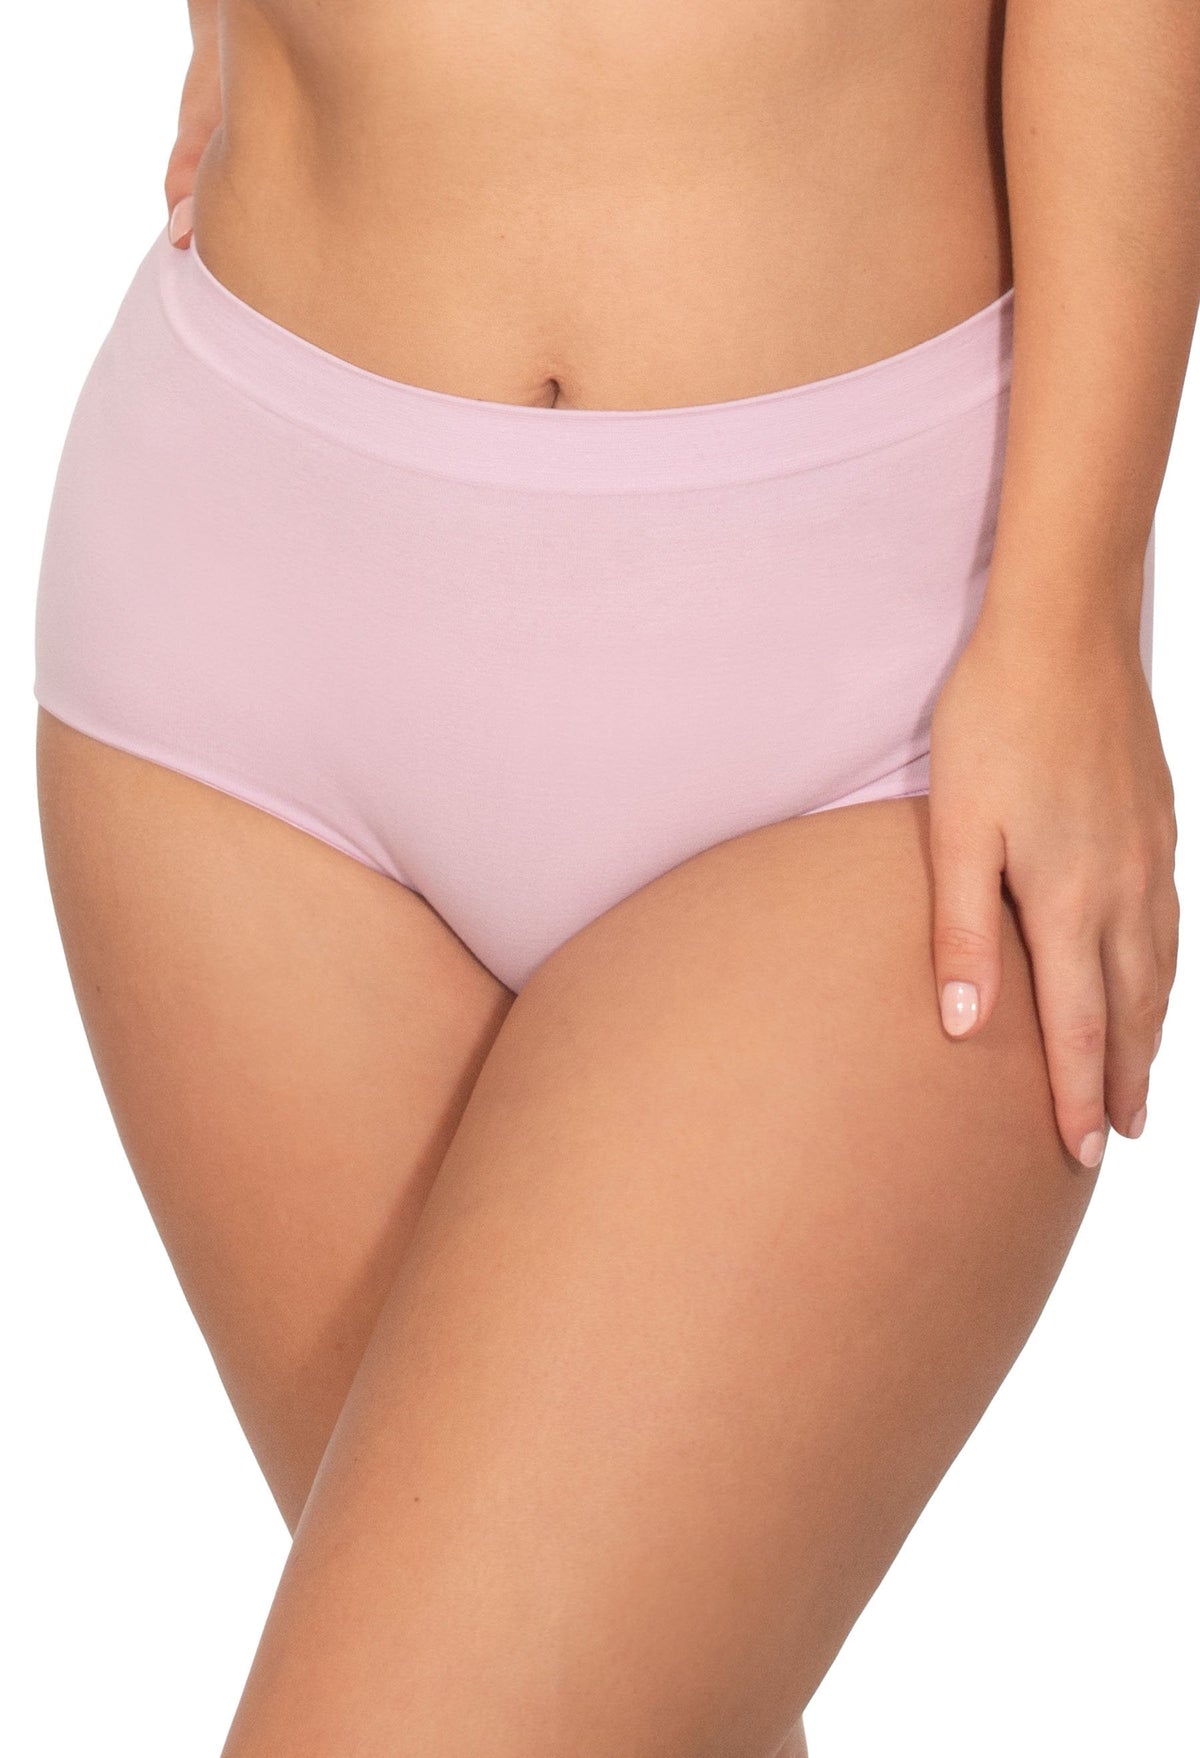 Super Stretchy Marilyn Cotton Full Brief Pack - 3 Pack